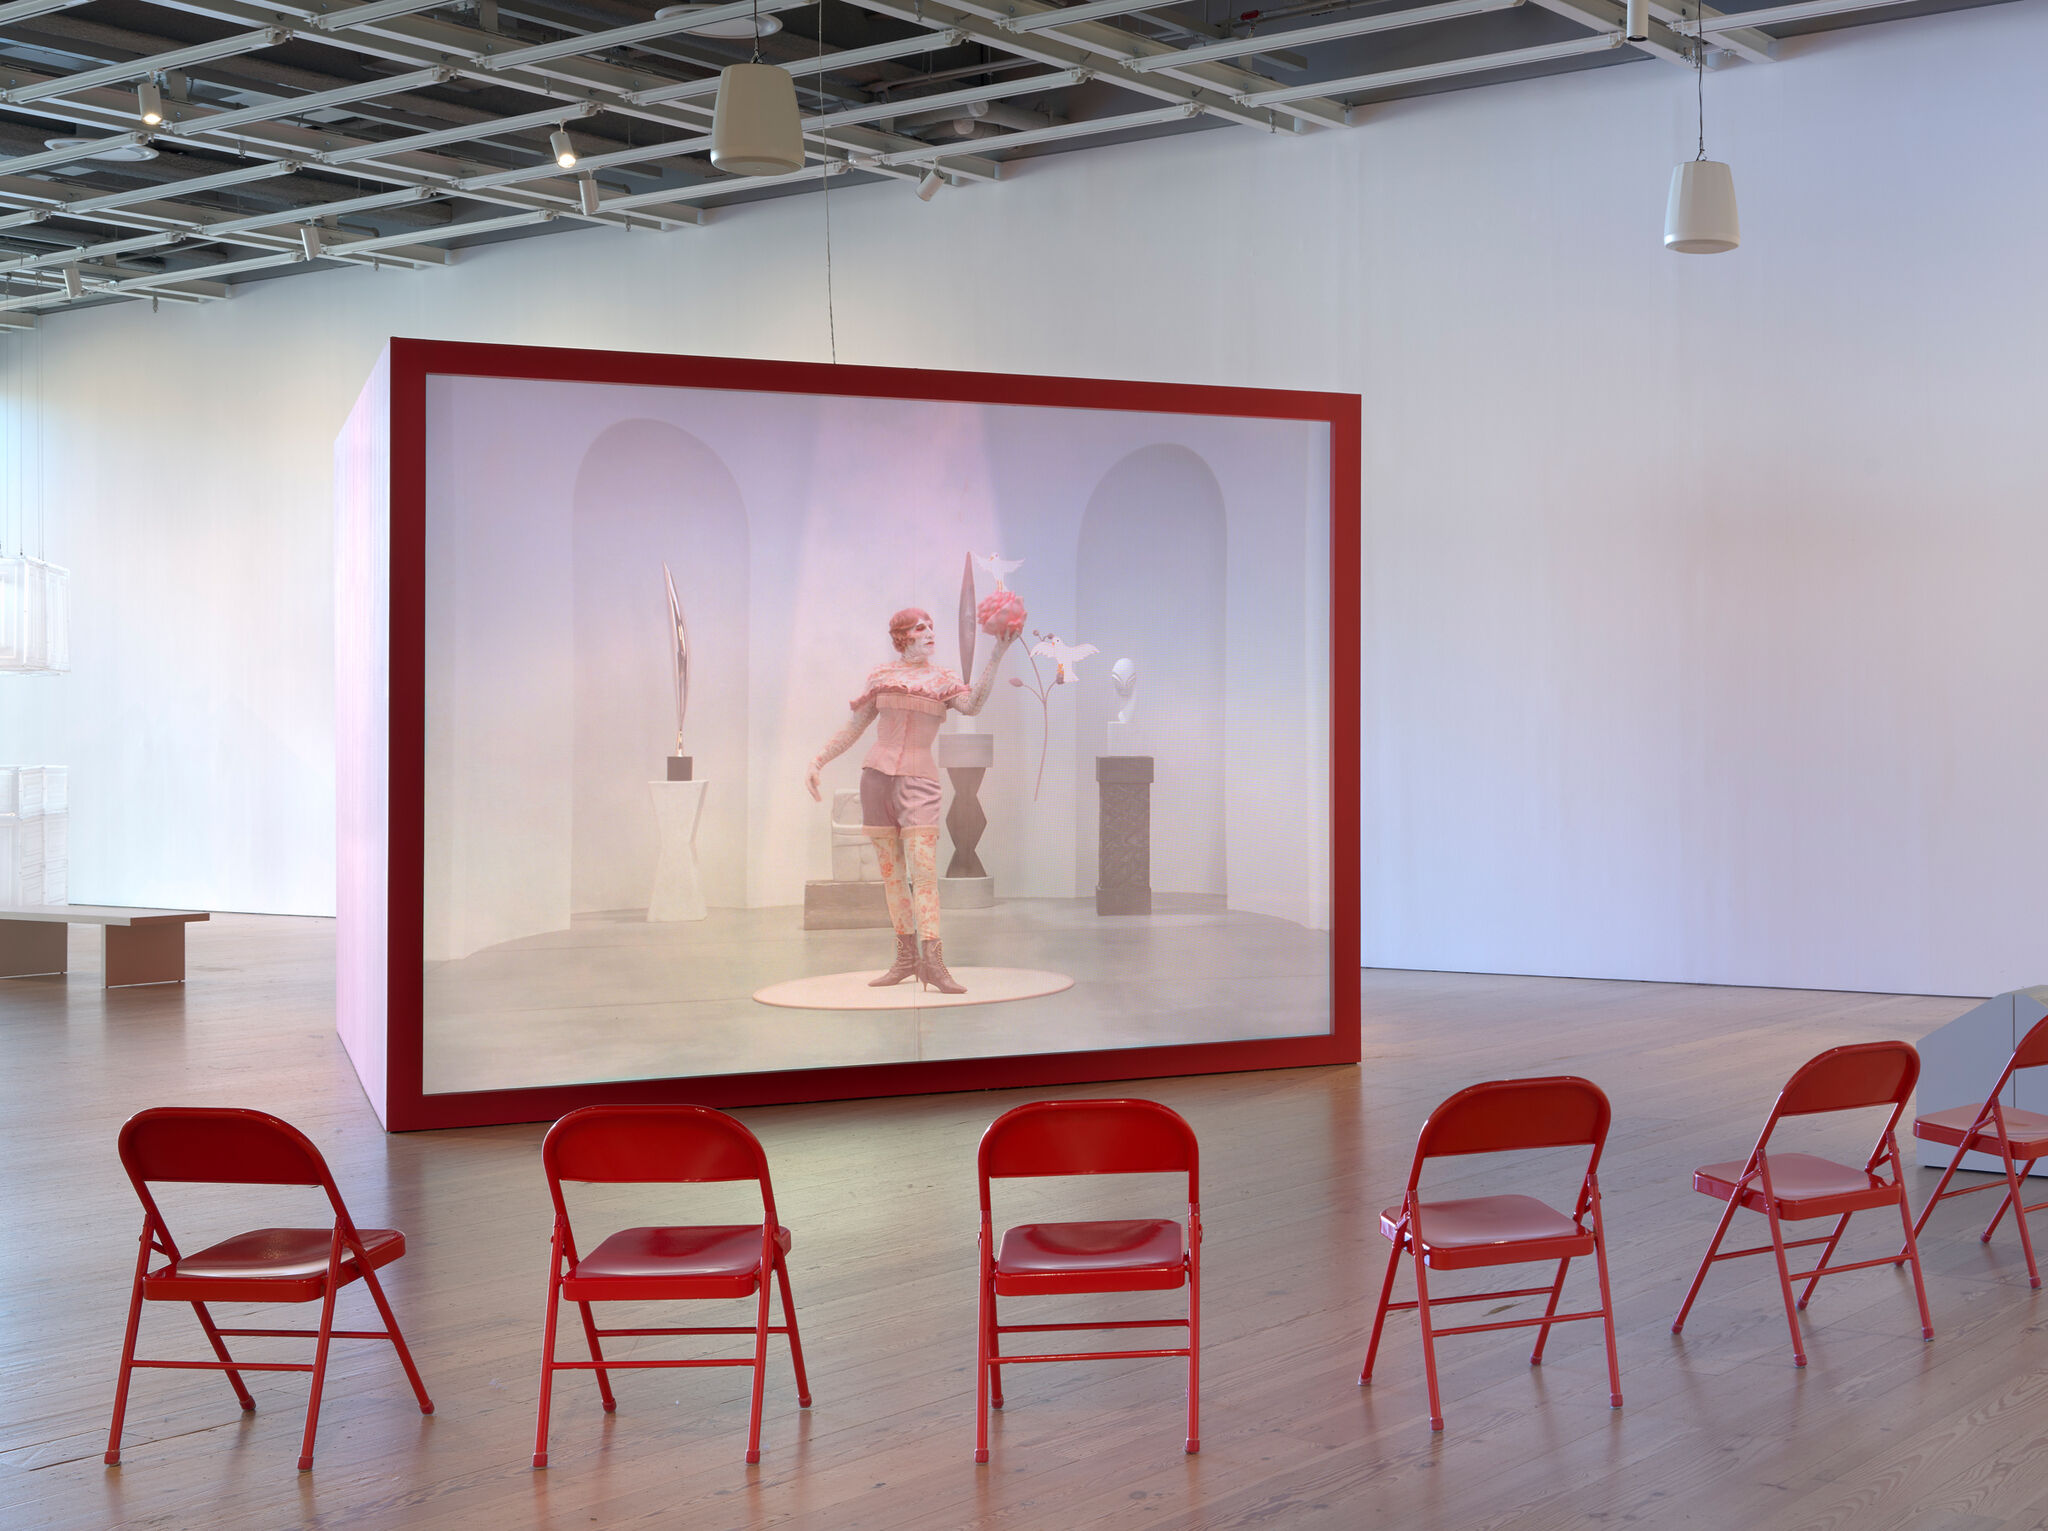 Image of a sculpture gallery projected against a large, red cube.